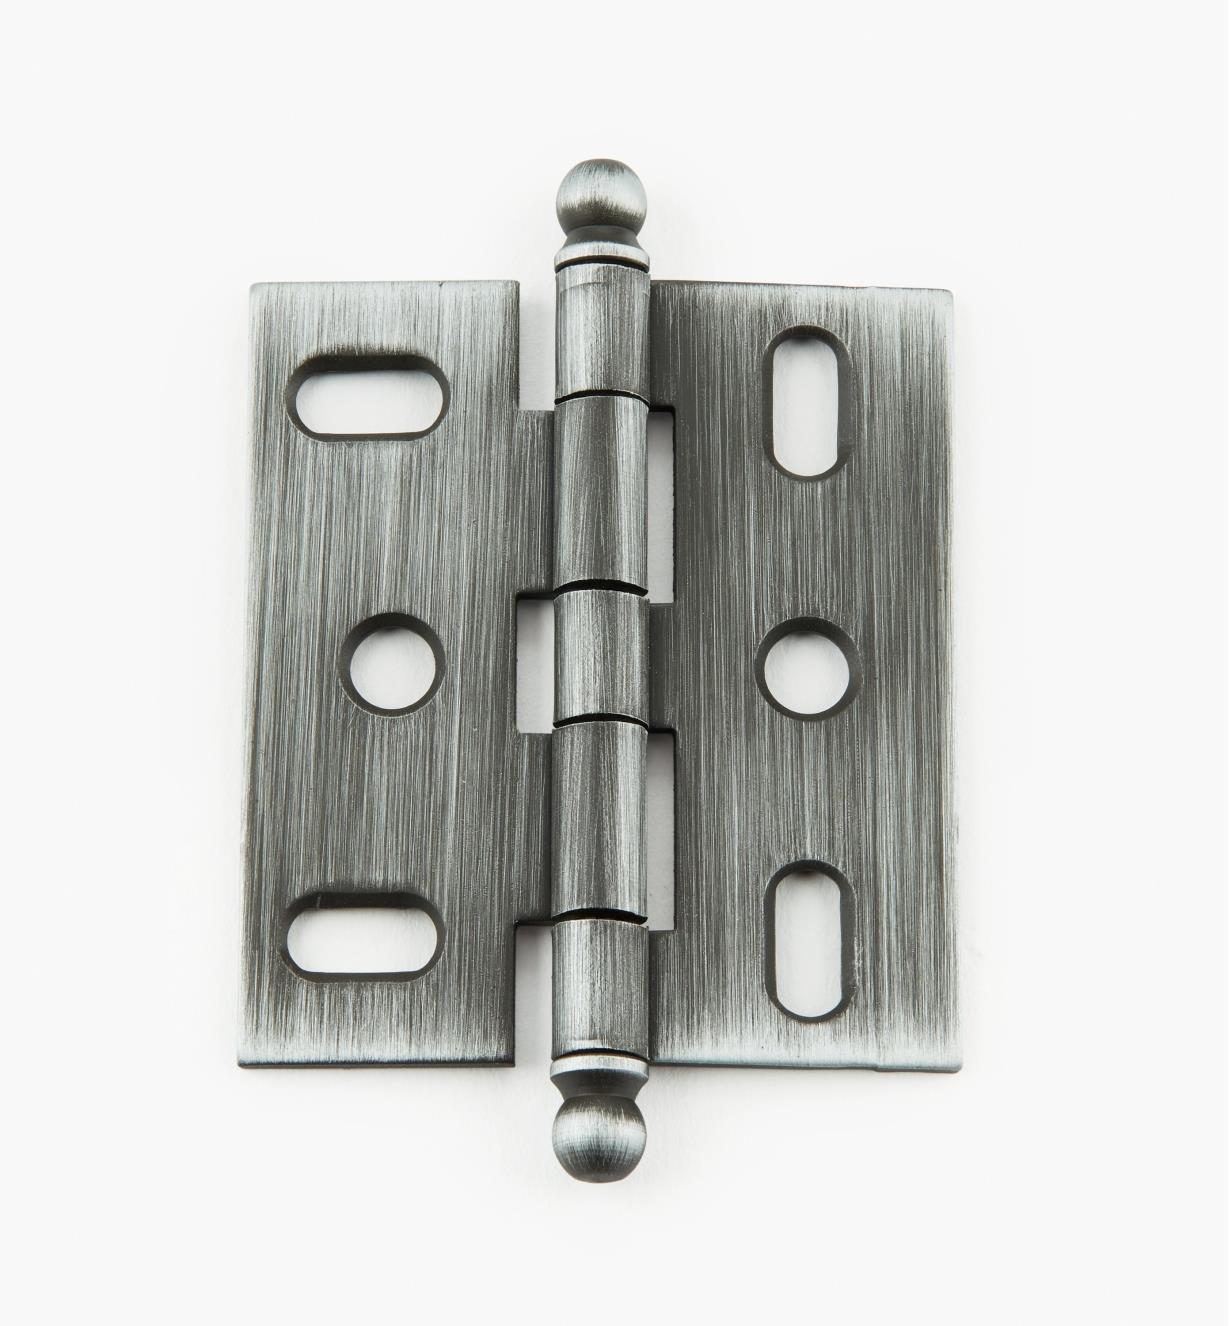 02H1006 - Weathered Pewter Ball-Tip Hinge, each